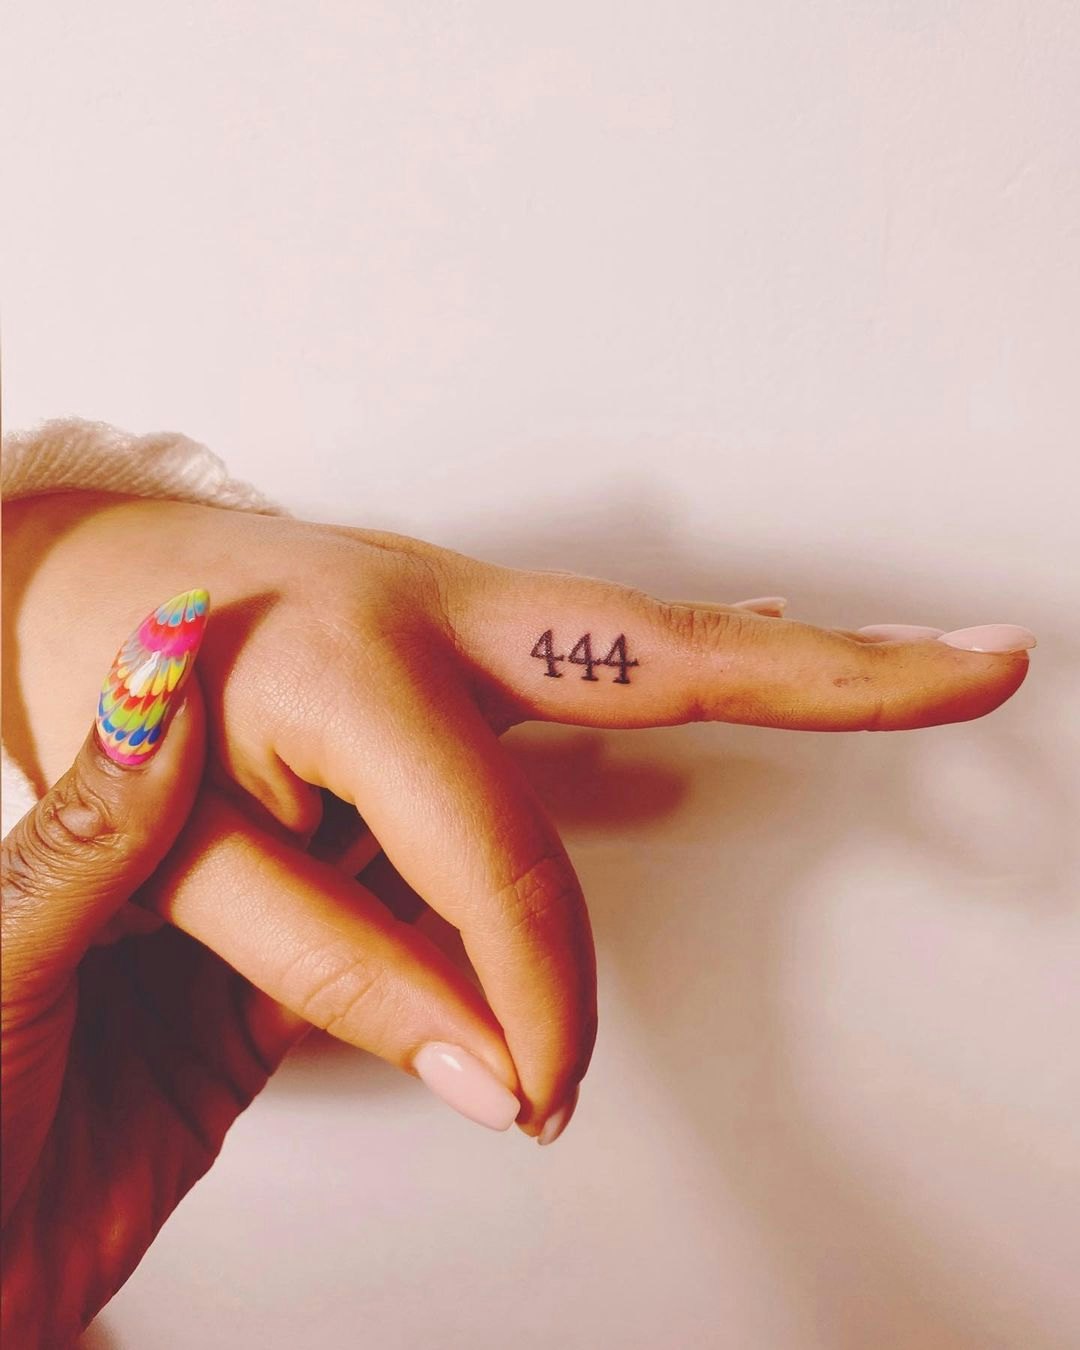 Number 444 tattoo located on the thumb